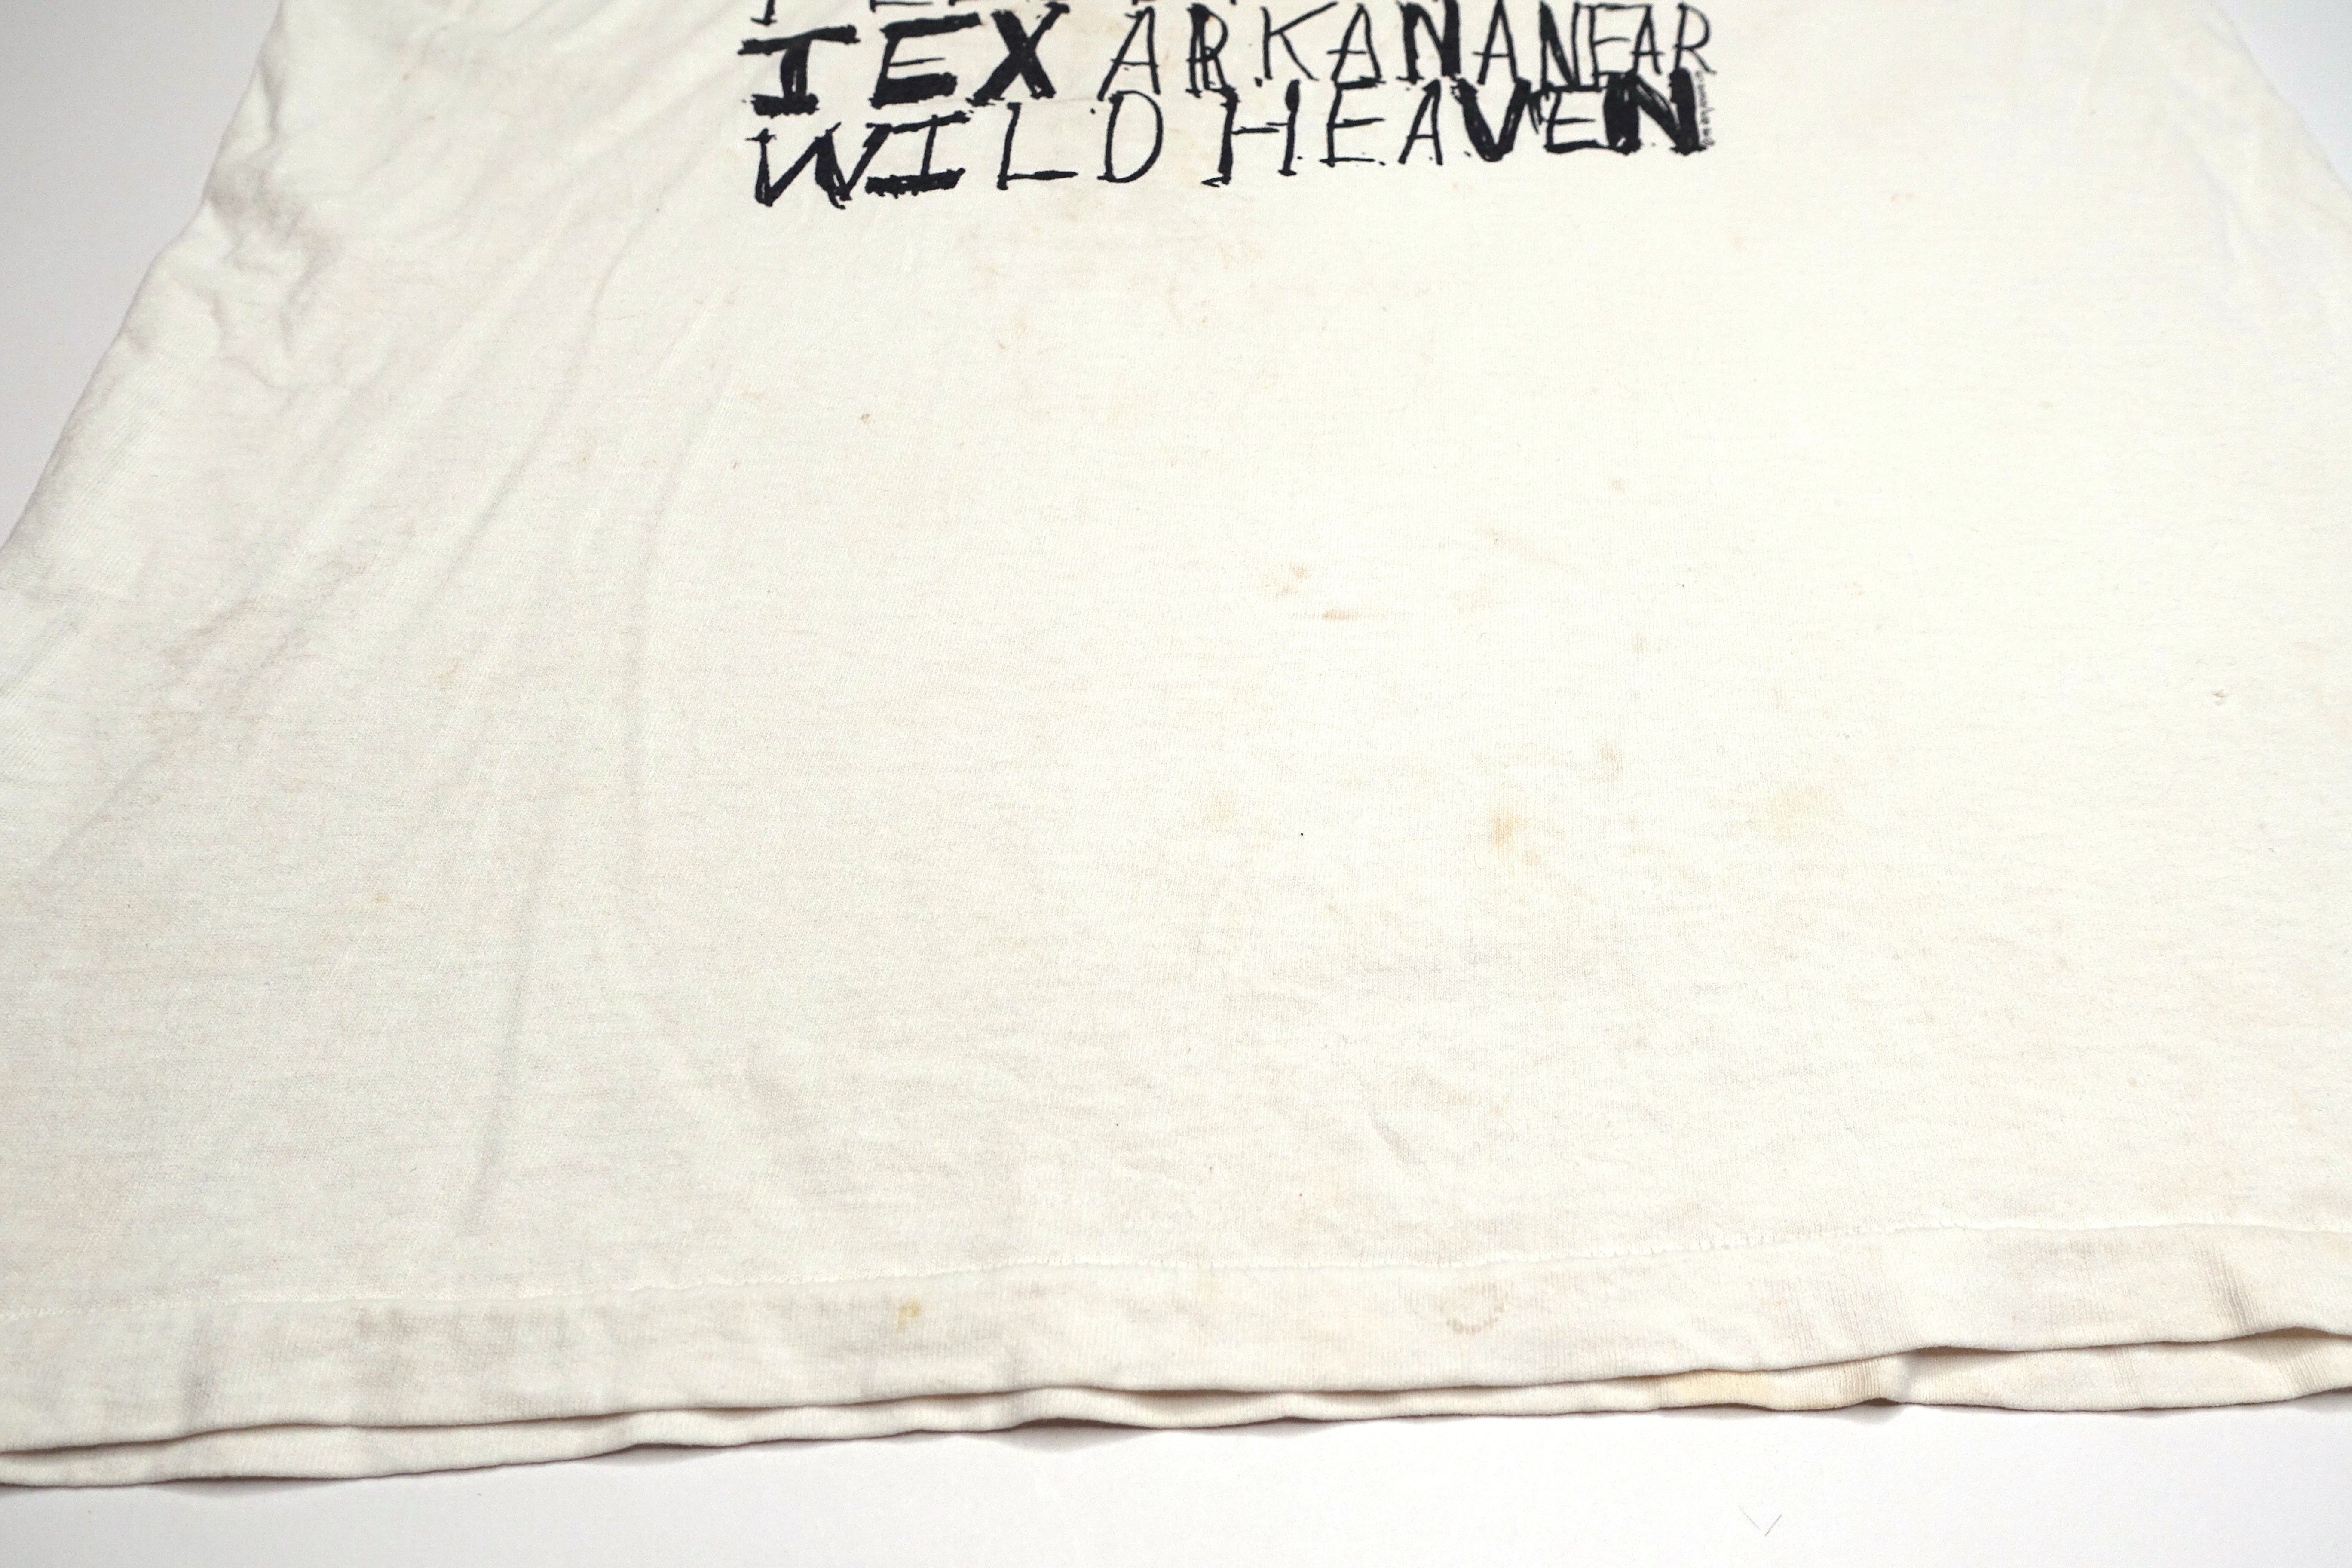 R.E.M. ‎– Out Of Time 1991 Tour Shirt Size Large